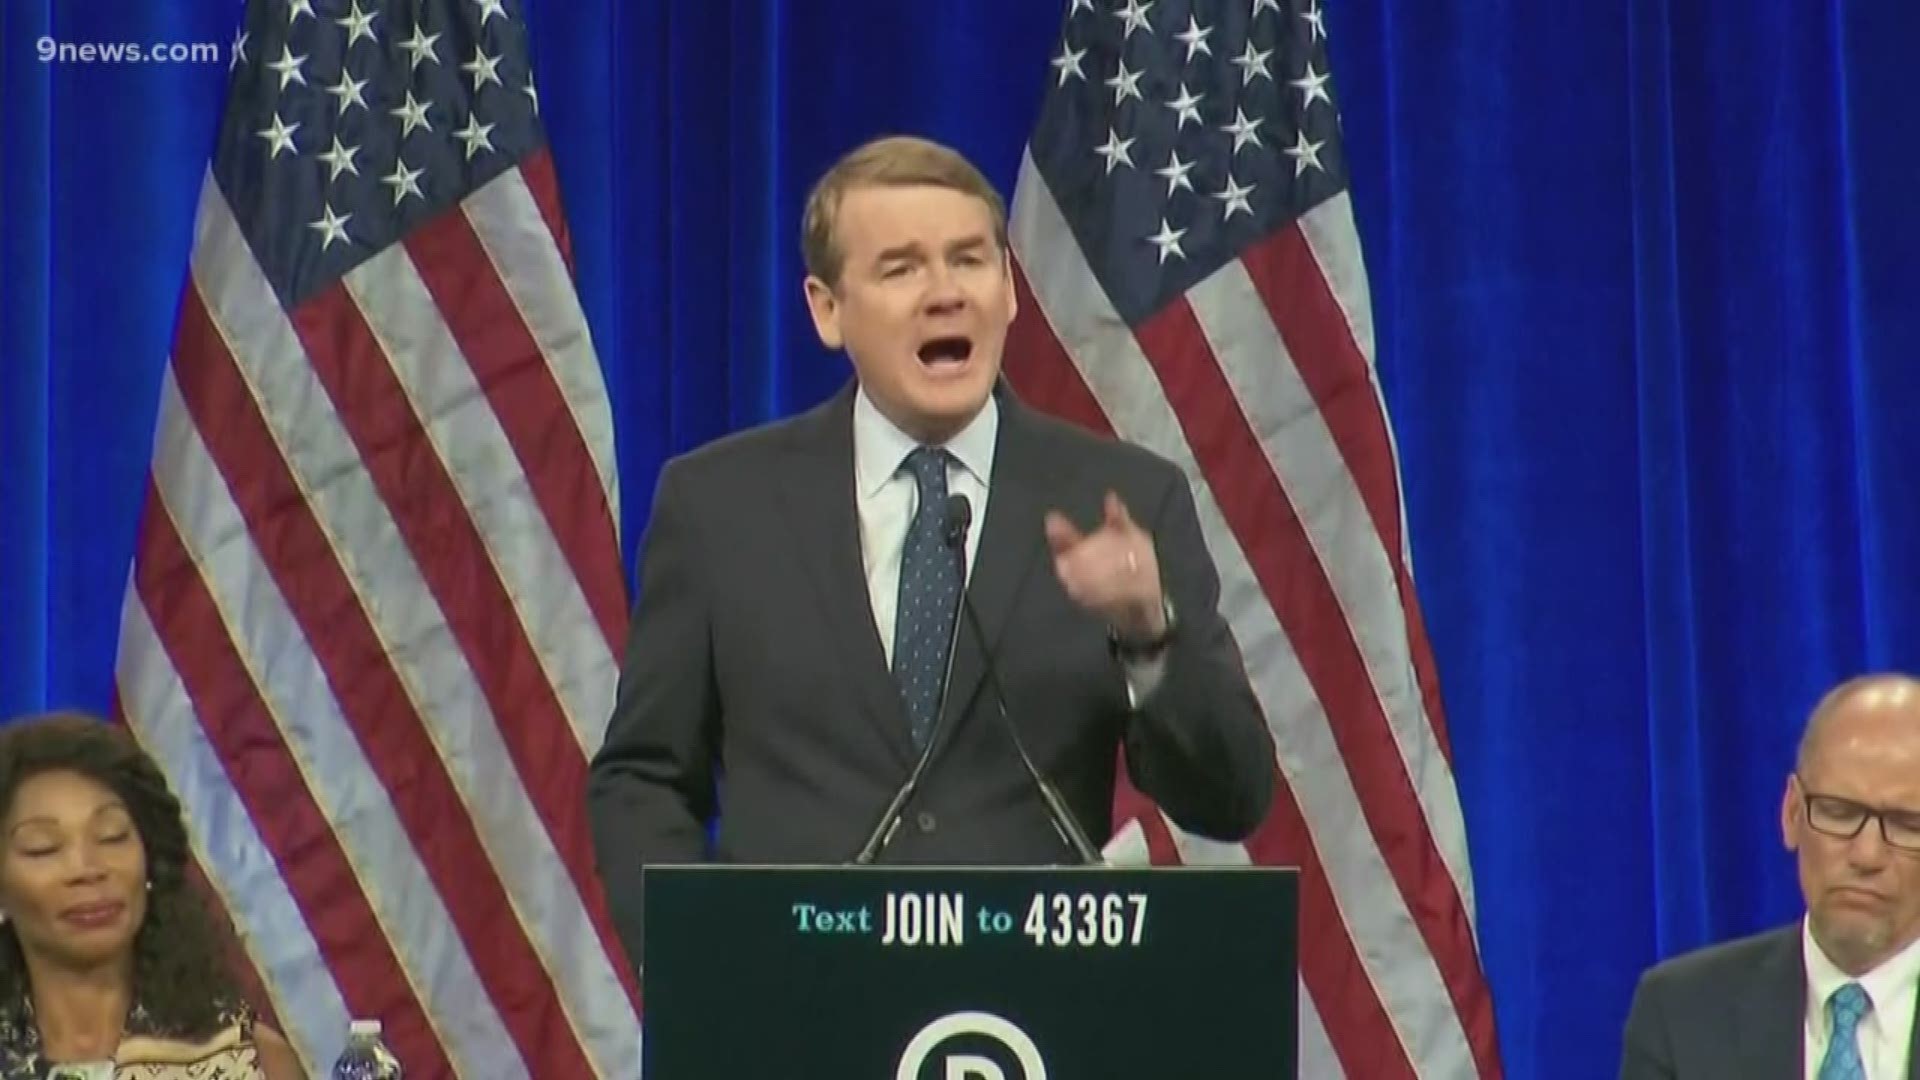 Michael Bennet said he was not happy with the Democratic National Convention for its rules that prevented him from participating in the third debate.